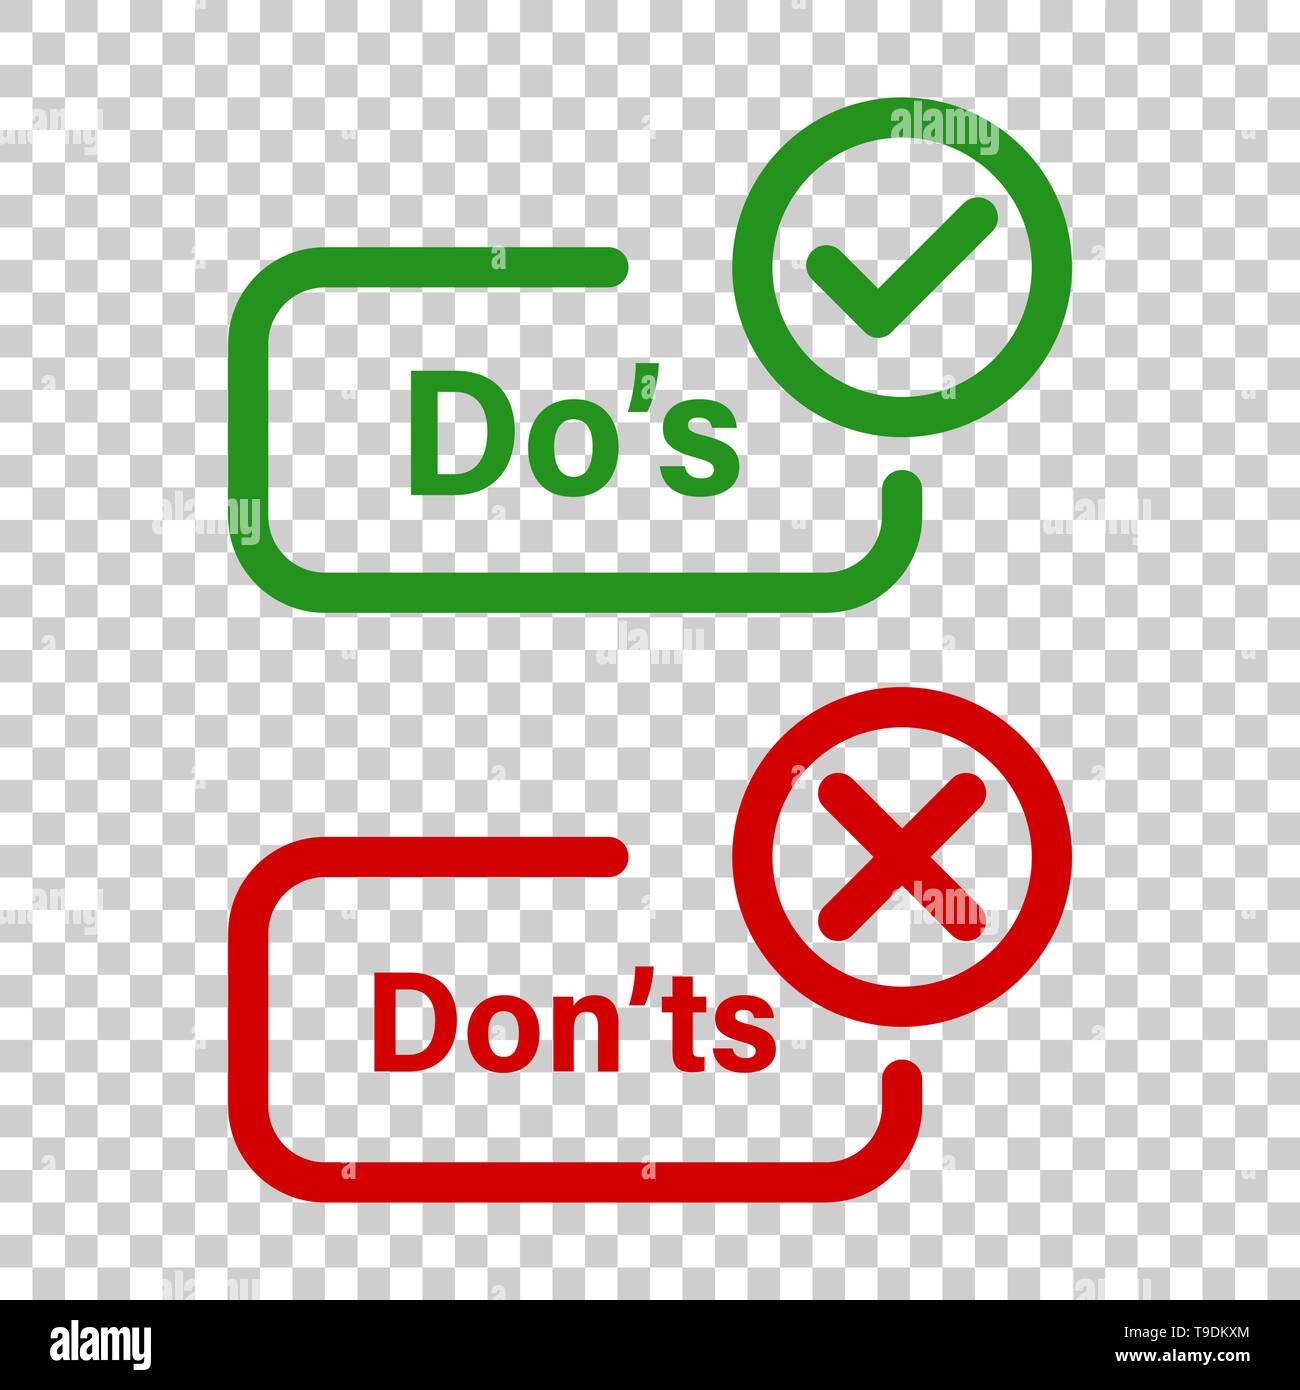 Does and donts